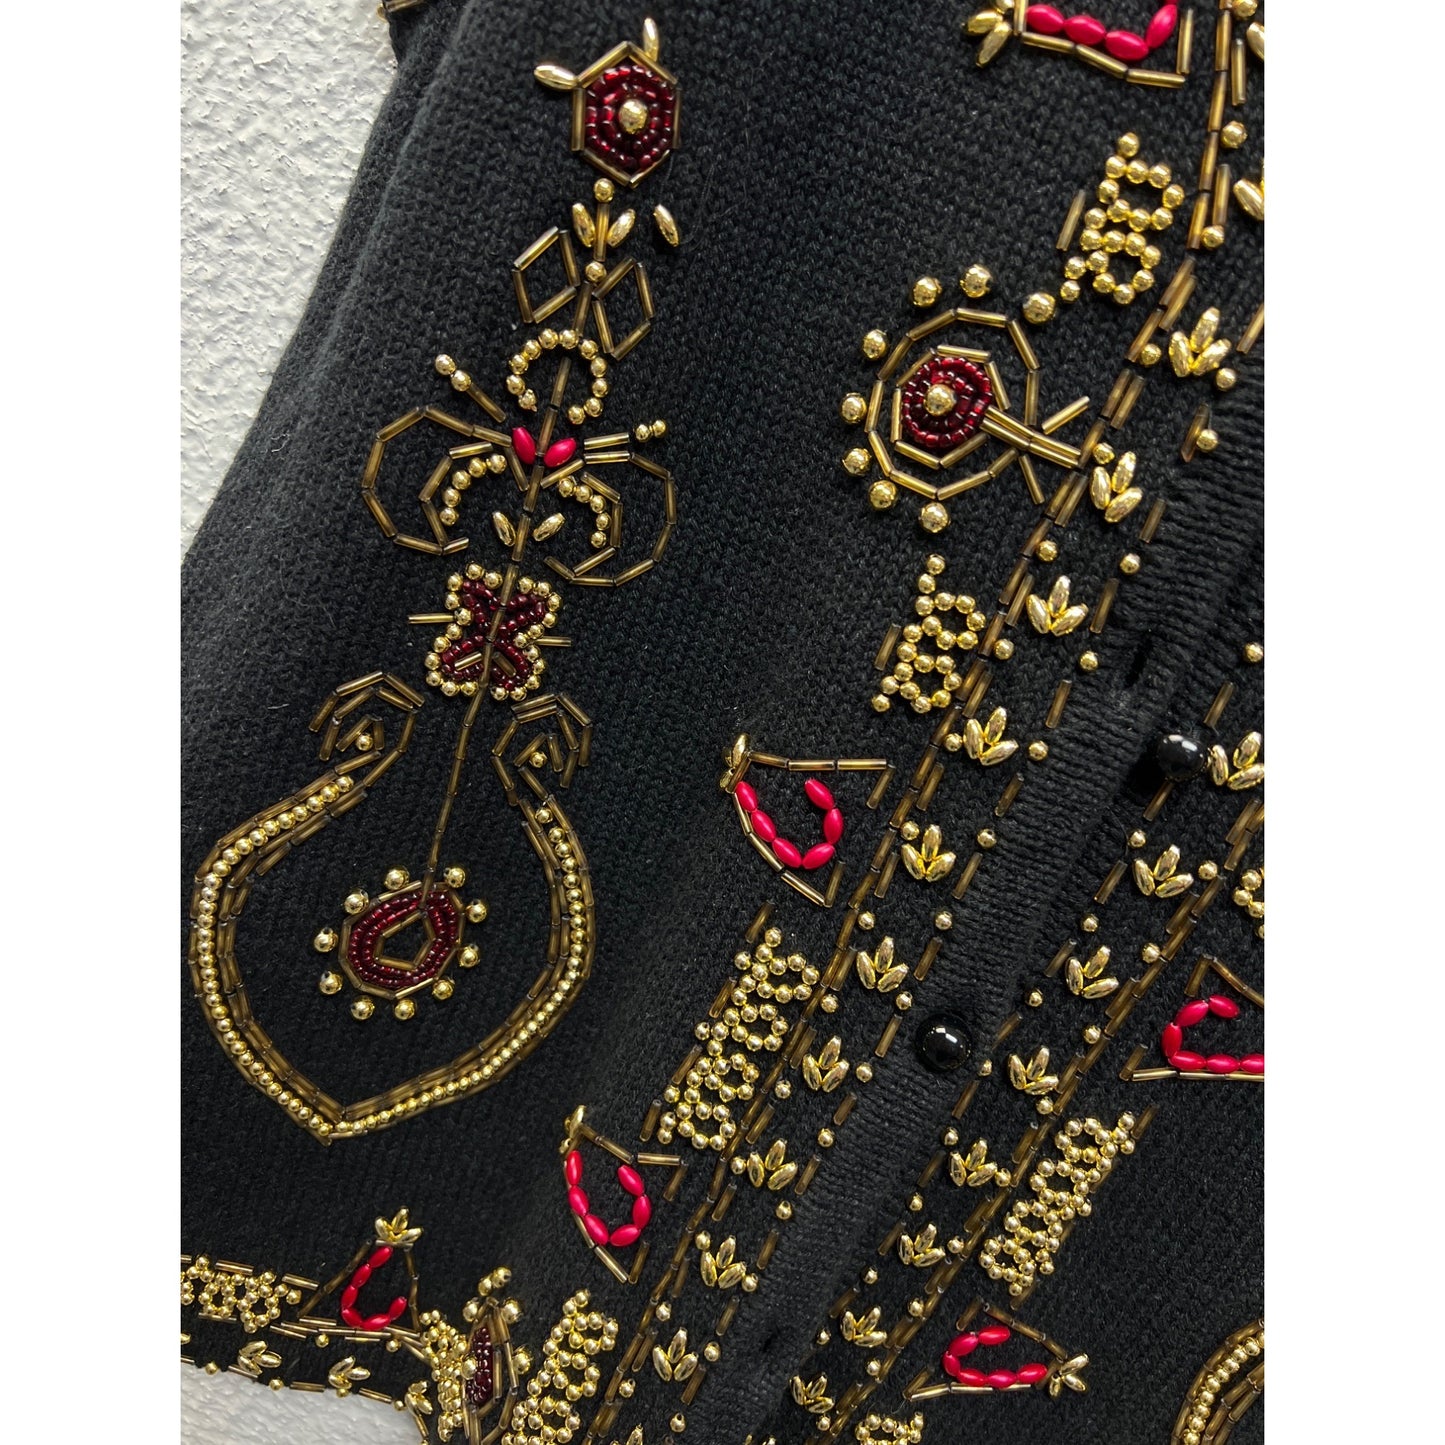 Claudia D NWT Black Holiday Sweater Vest with Gold & Red Beading